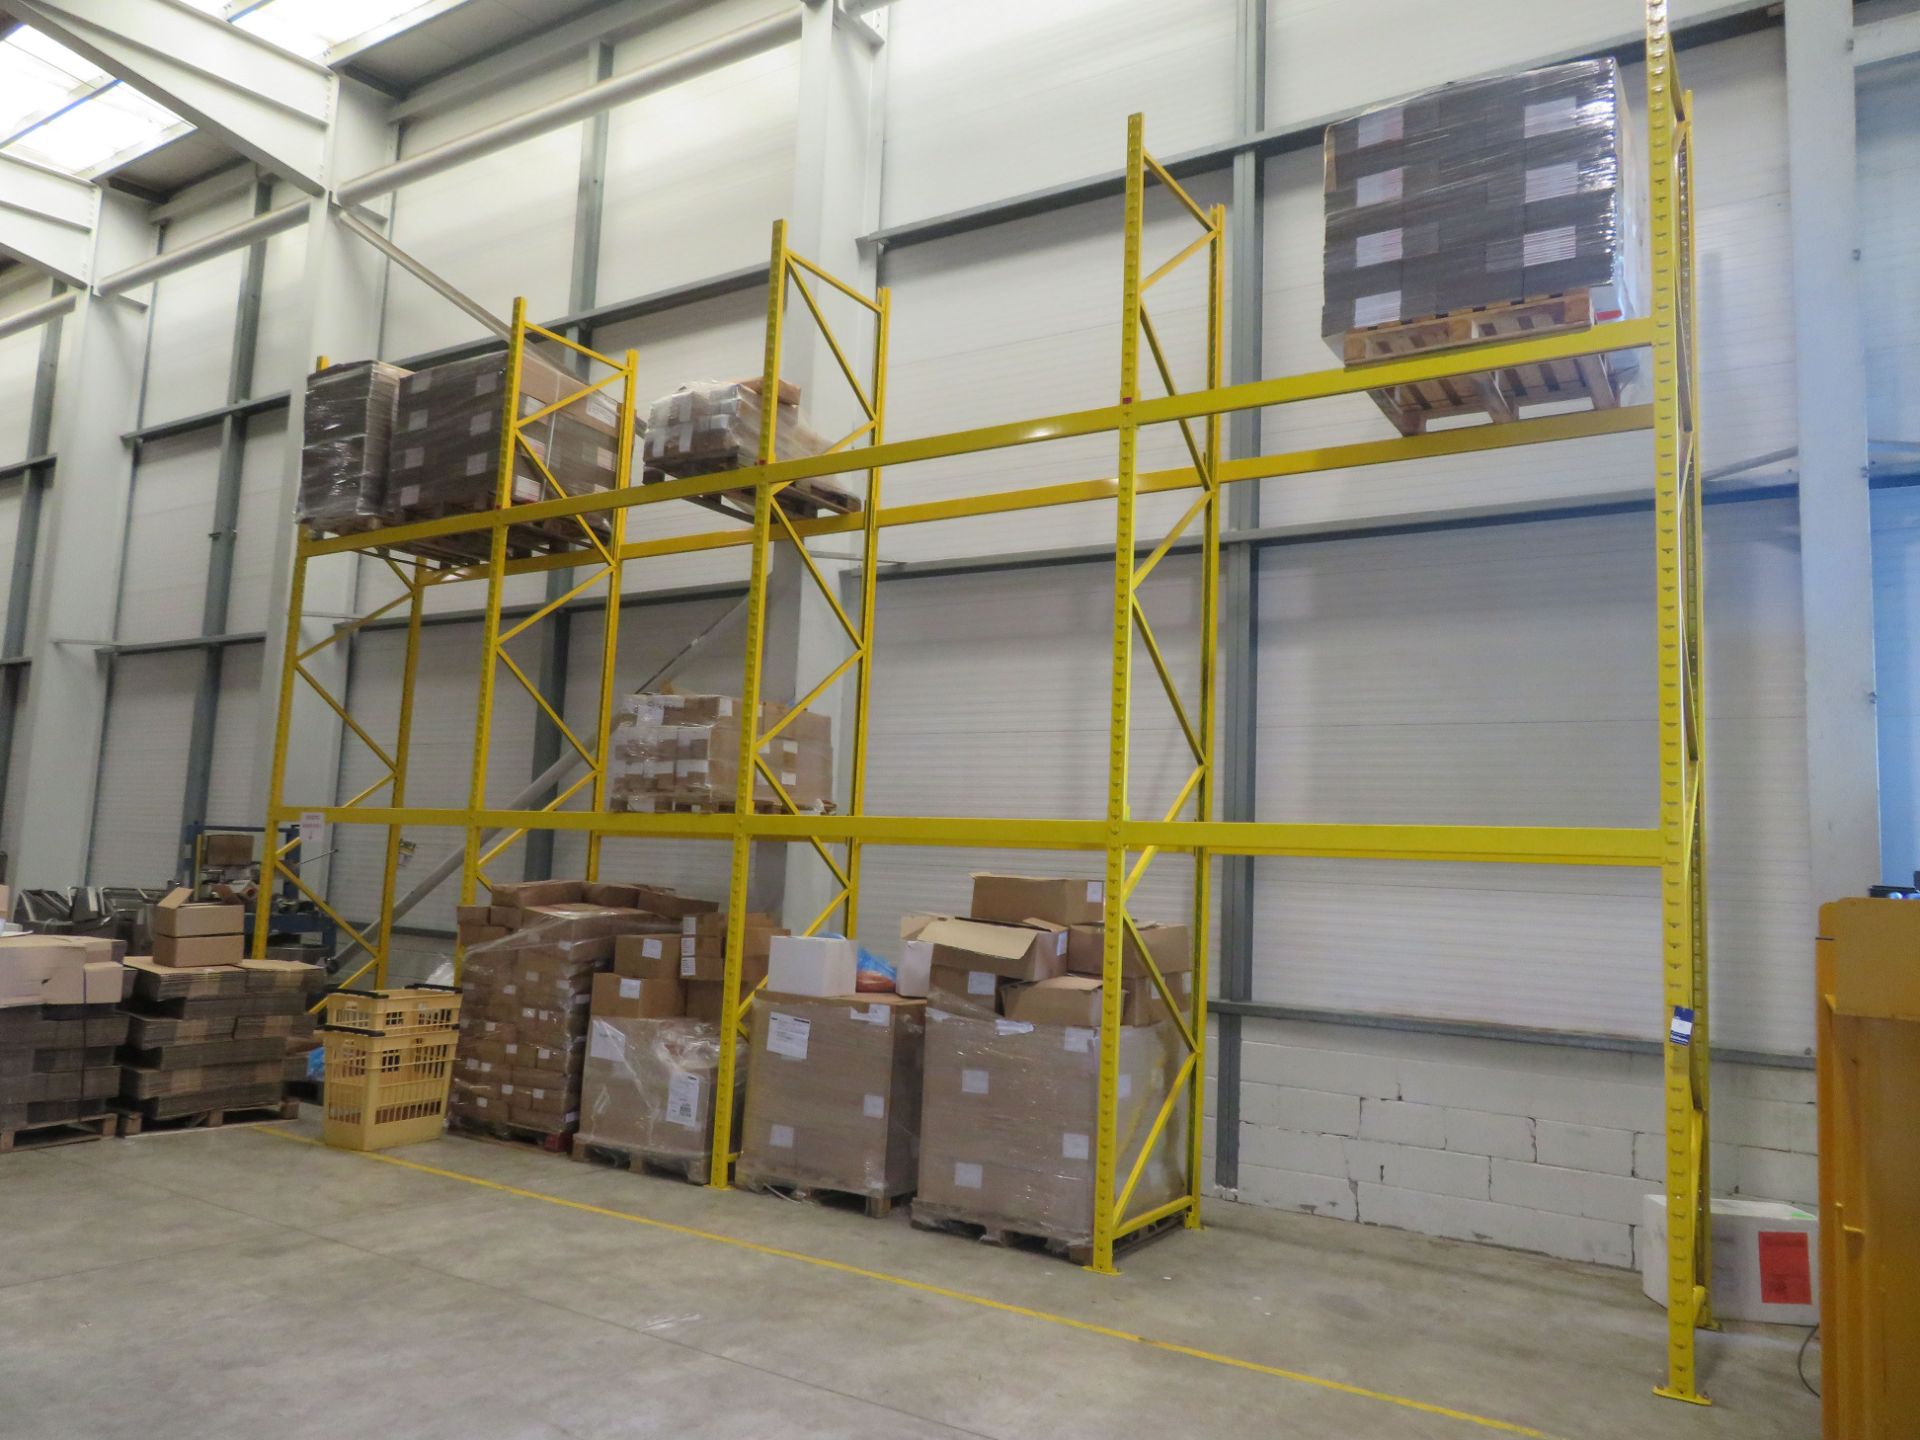 4x Bays of Pallet Racking- each bay 2.25 x 1.1 x 5.7m high - Image 2 of 2